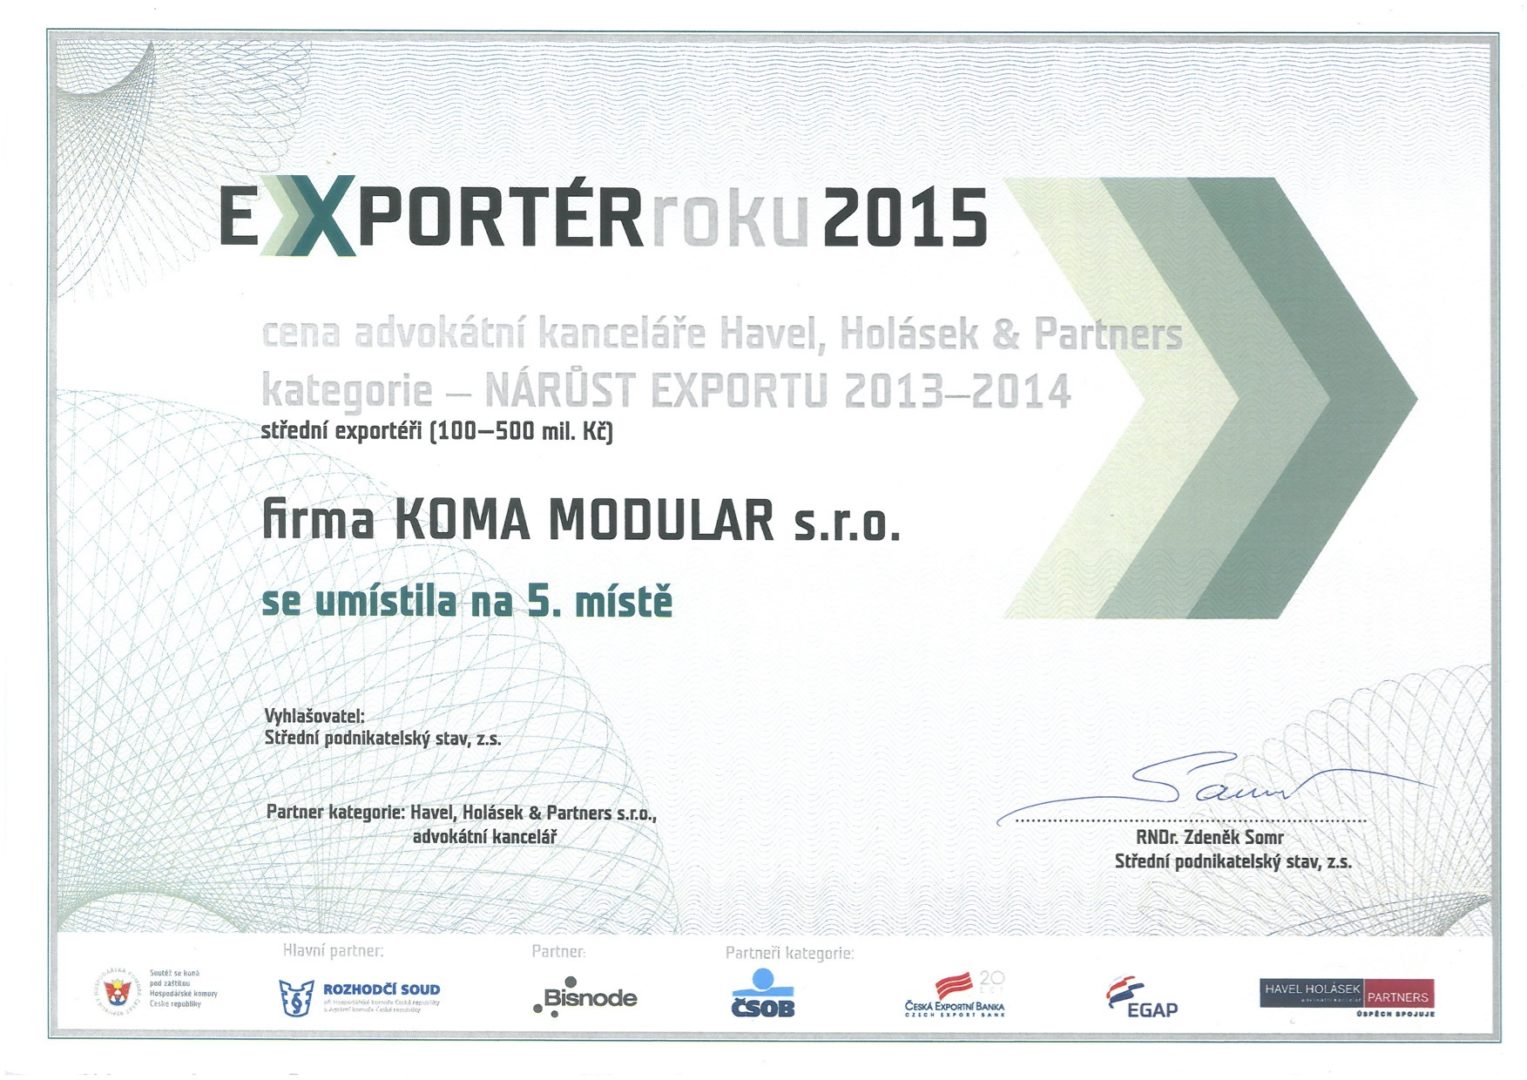 Exporter of the Year 2015 Award